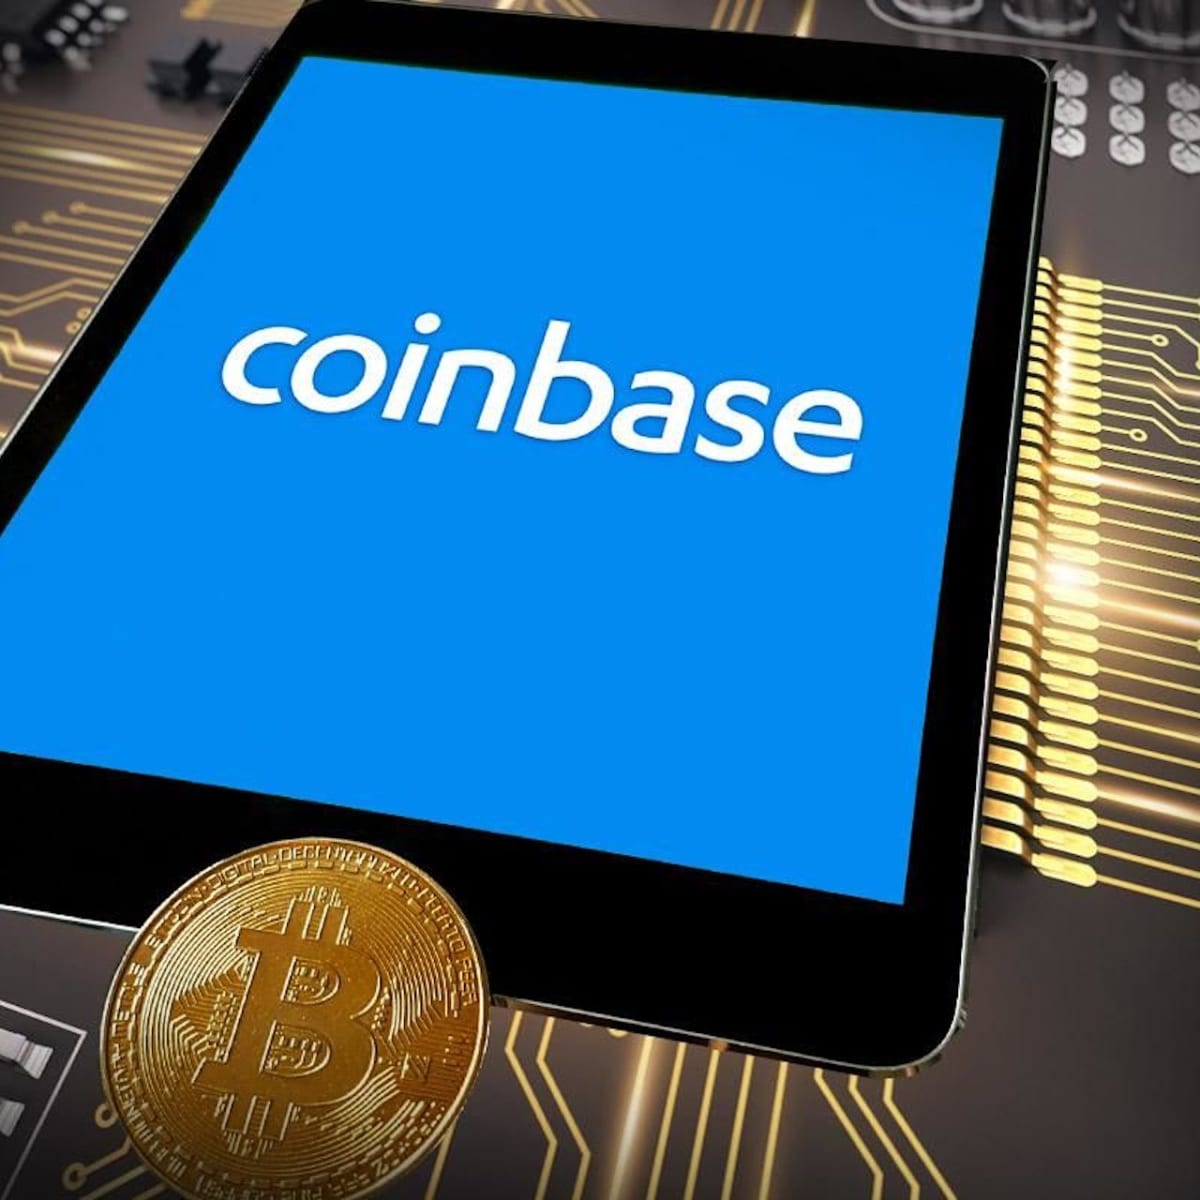 Coin Ipo Coinbase Plunges To All Time Low With Ipo Etf In Freefall Bloomberg / The coinbase